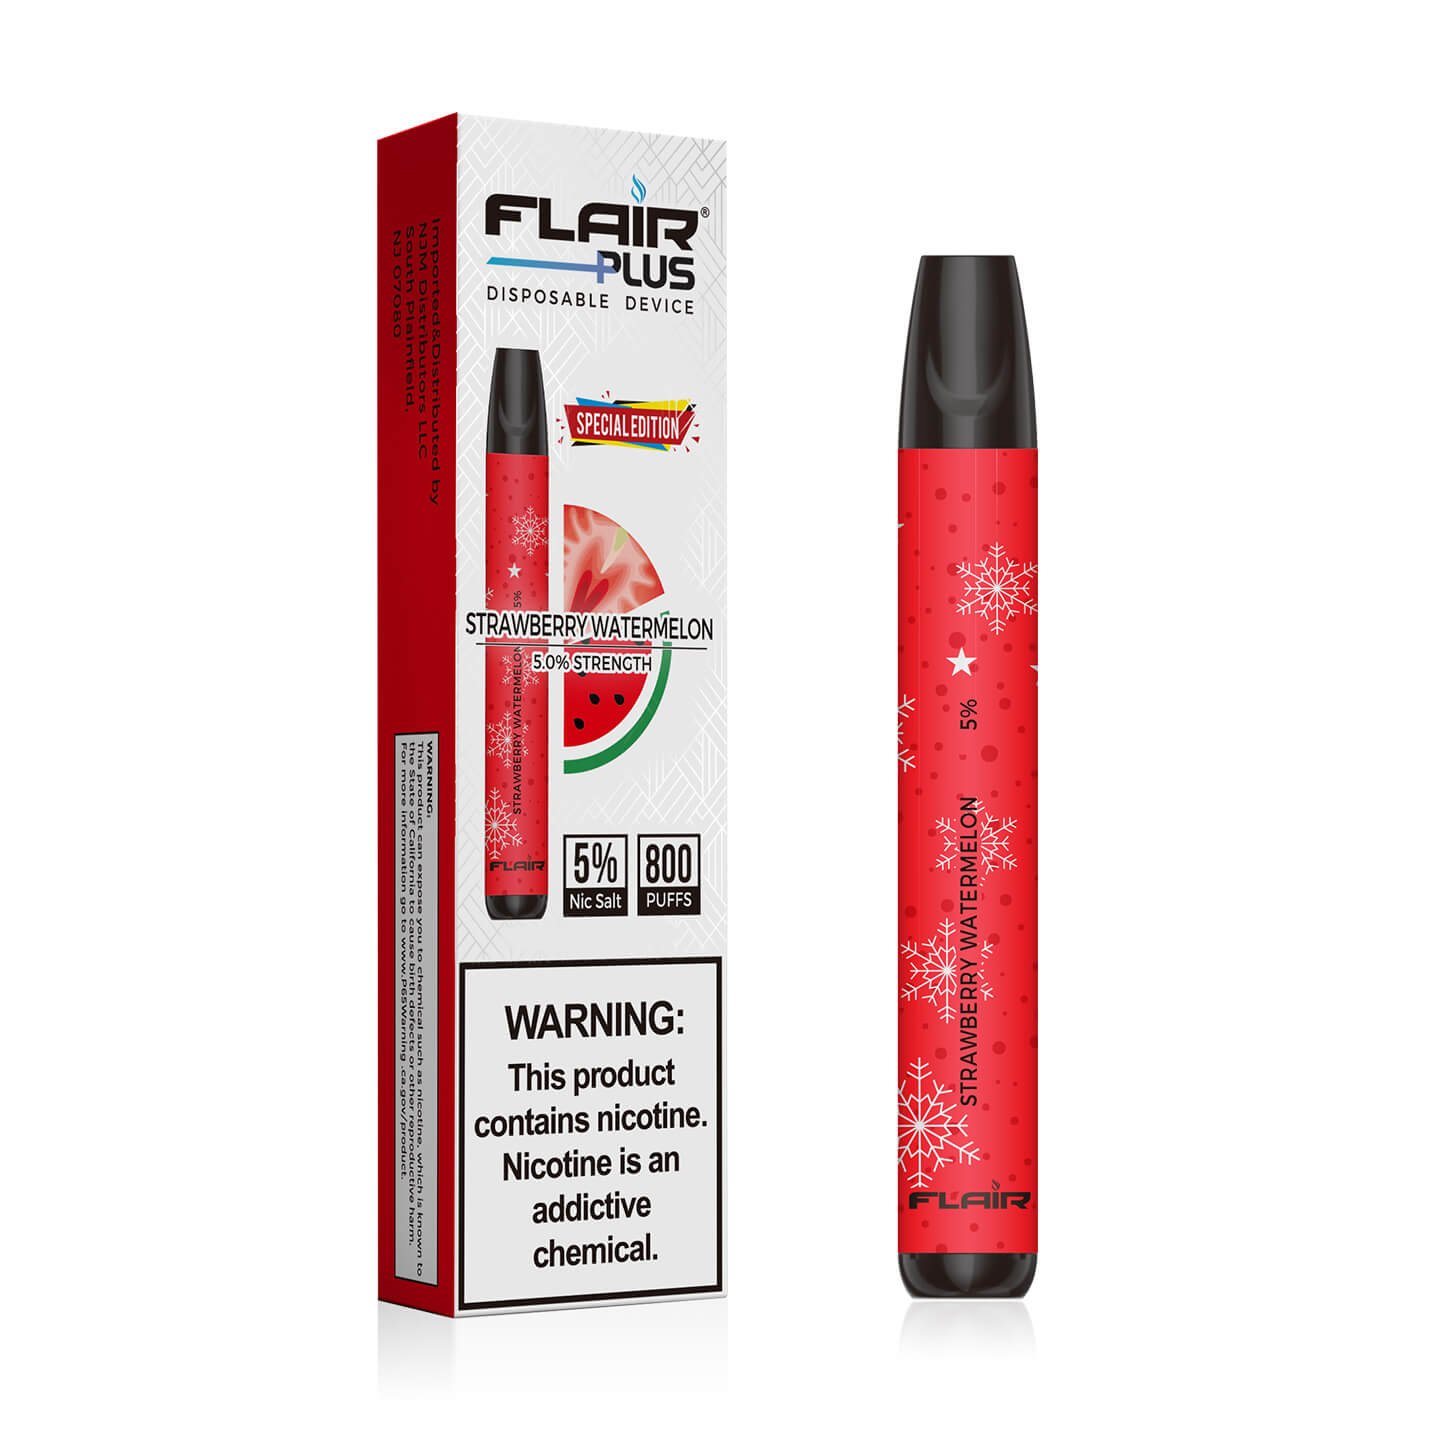 Flair Plus Disposable Devices (Strawberry Watermelon - 800 Puffs)